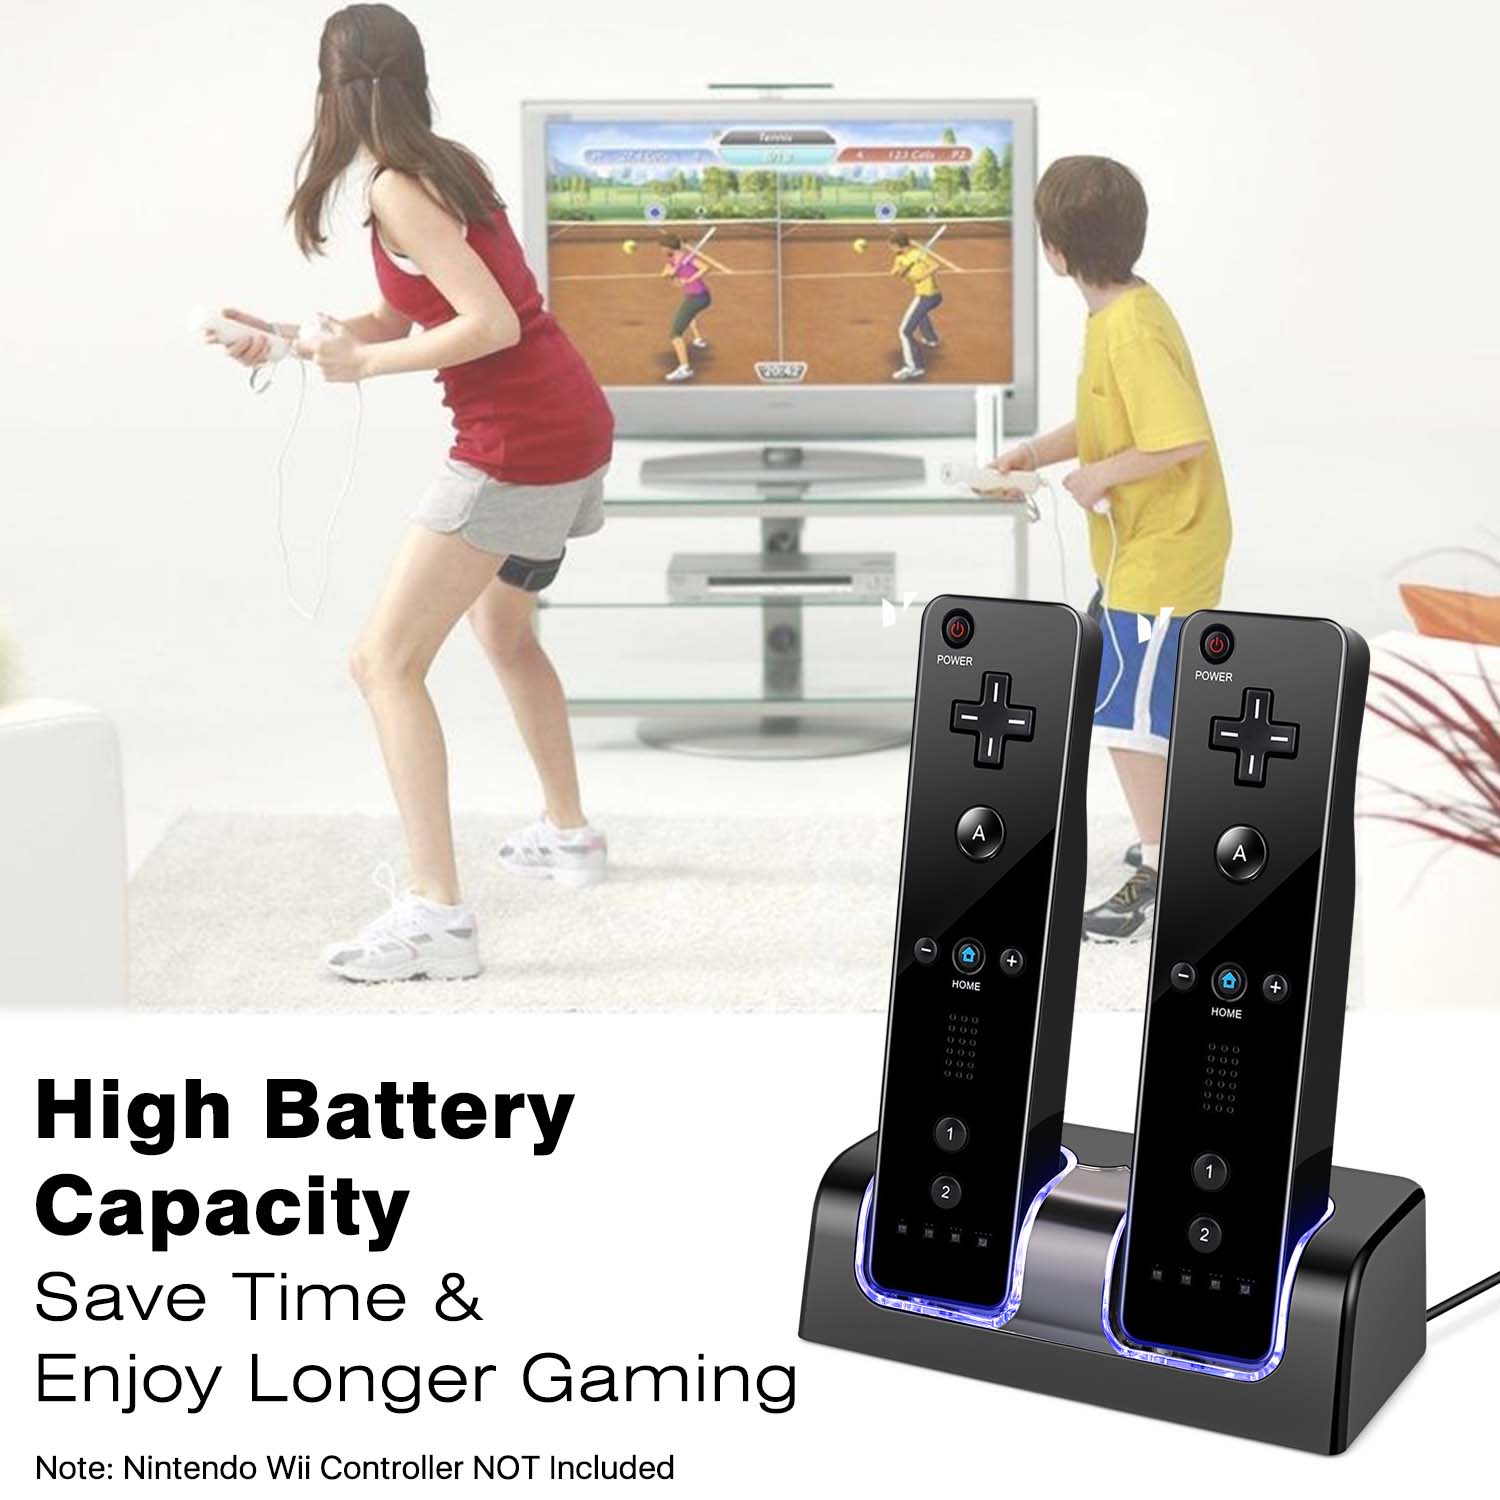 2 Slots Charging - This Wii battery charger comes with 2 charger slots for charging 2 Remote Controllers at the same time; Save time and enjoy longer gaming hours without low power concerns; LED lights glow indicating charging status